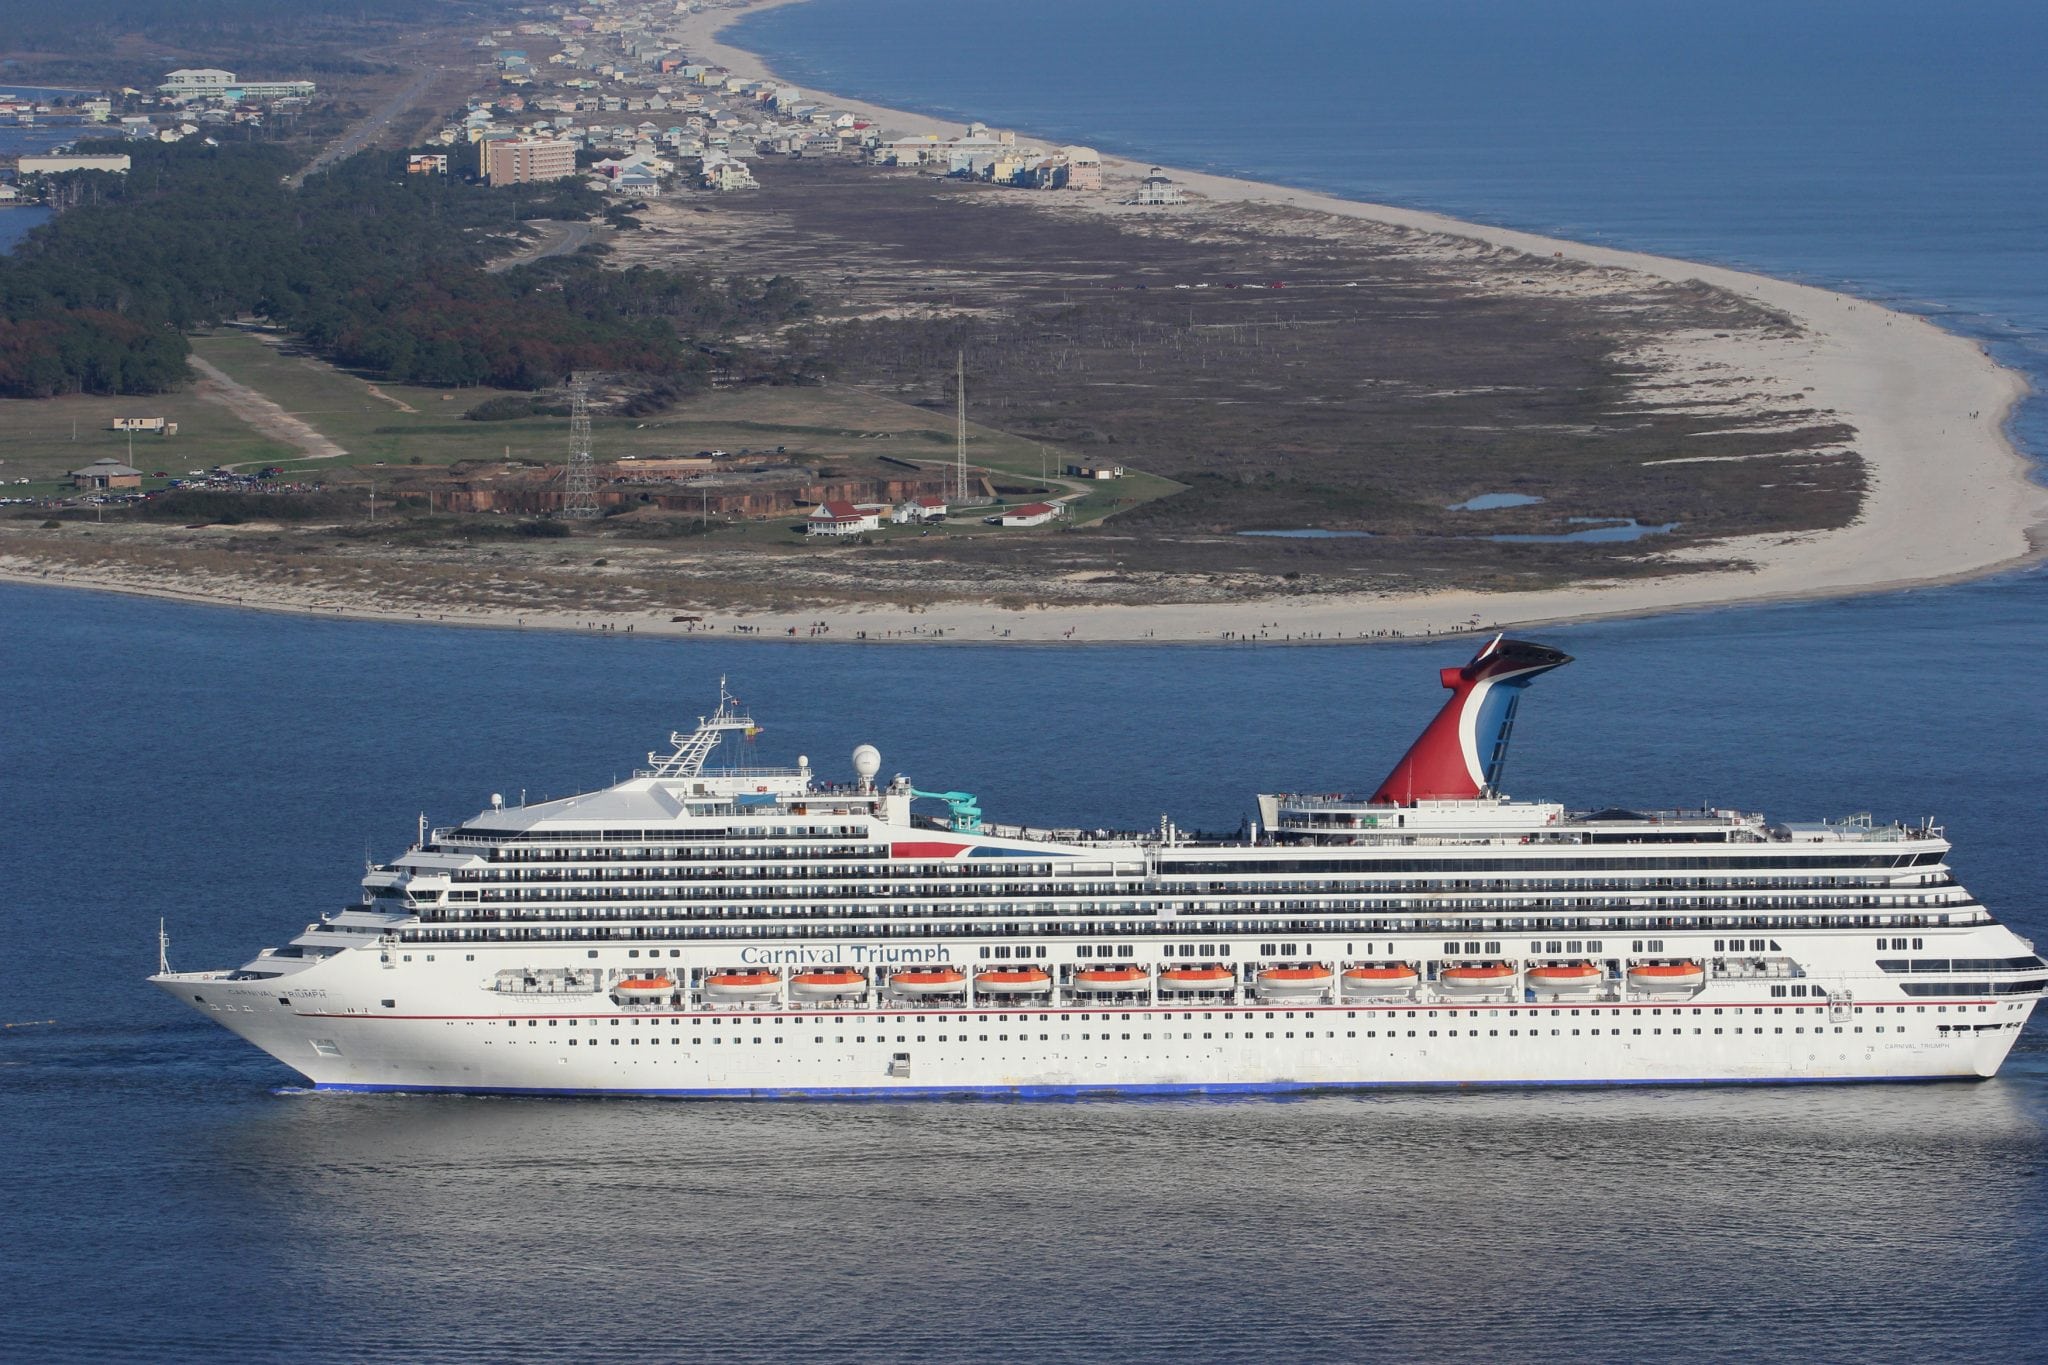 The Carnival Triumph cruise ship is towed towards the port of Mobile. 